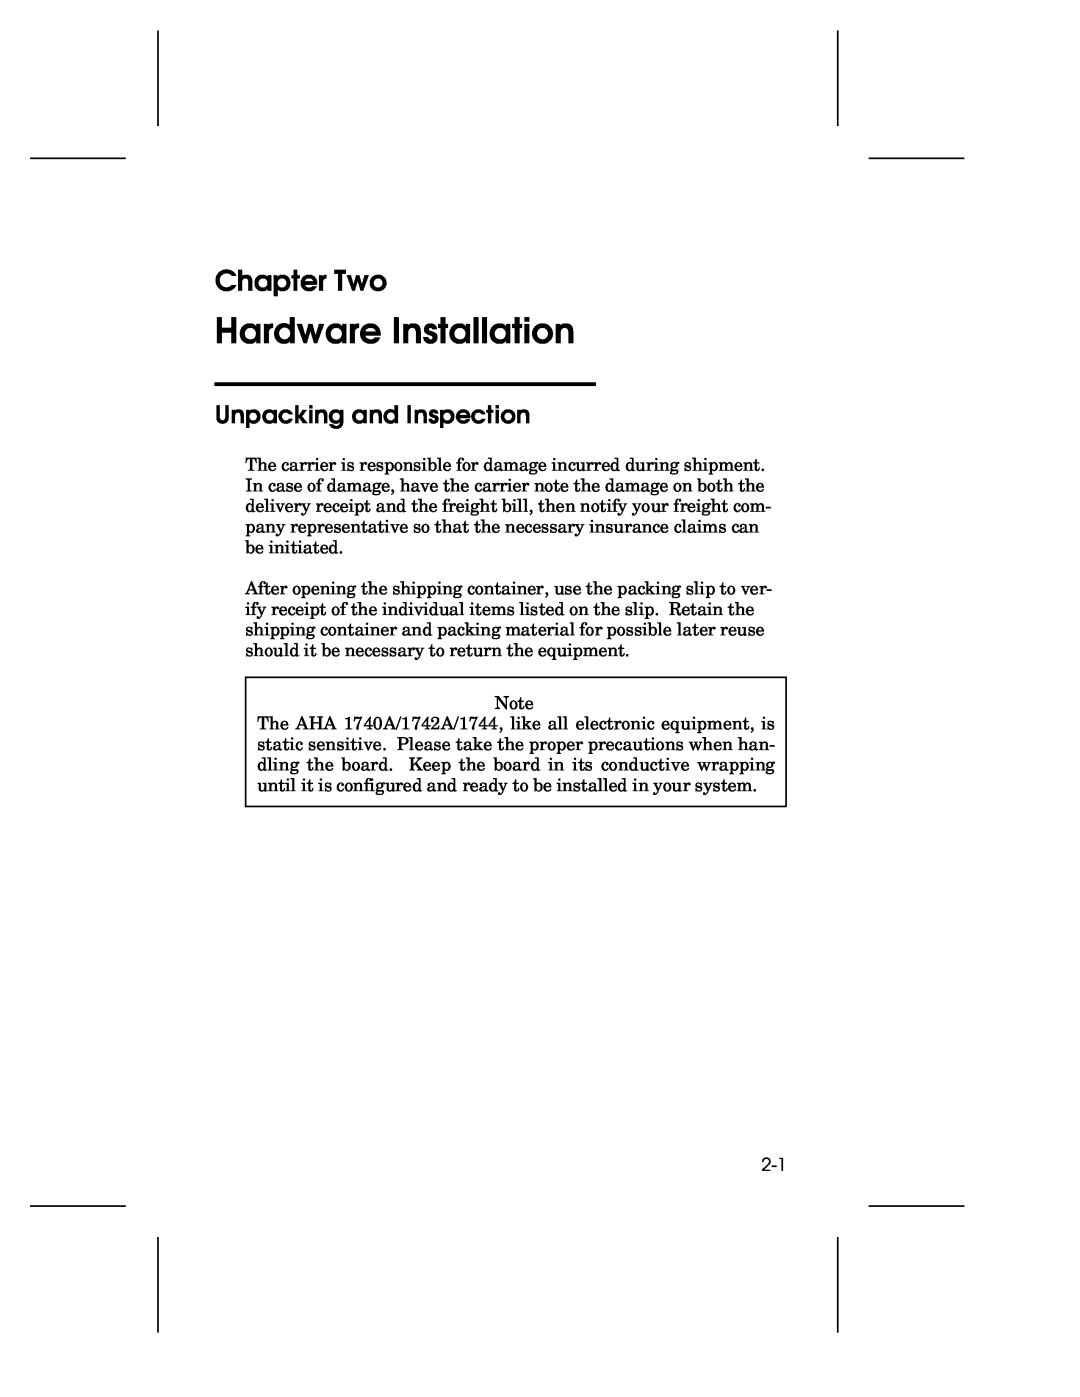 Adaptec 1744, AHA-1740A, 1742A user manual Hardware Installation, Chapter Two, Unpacking and Inspection 